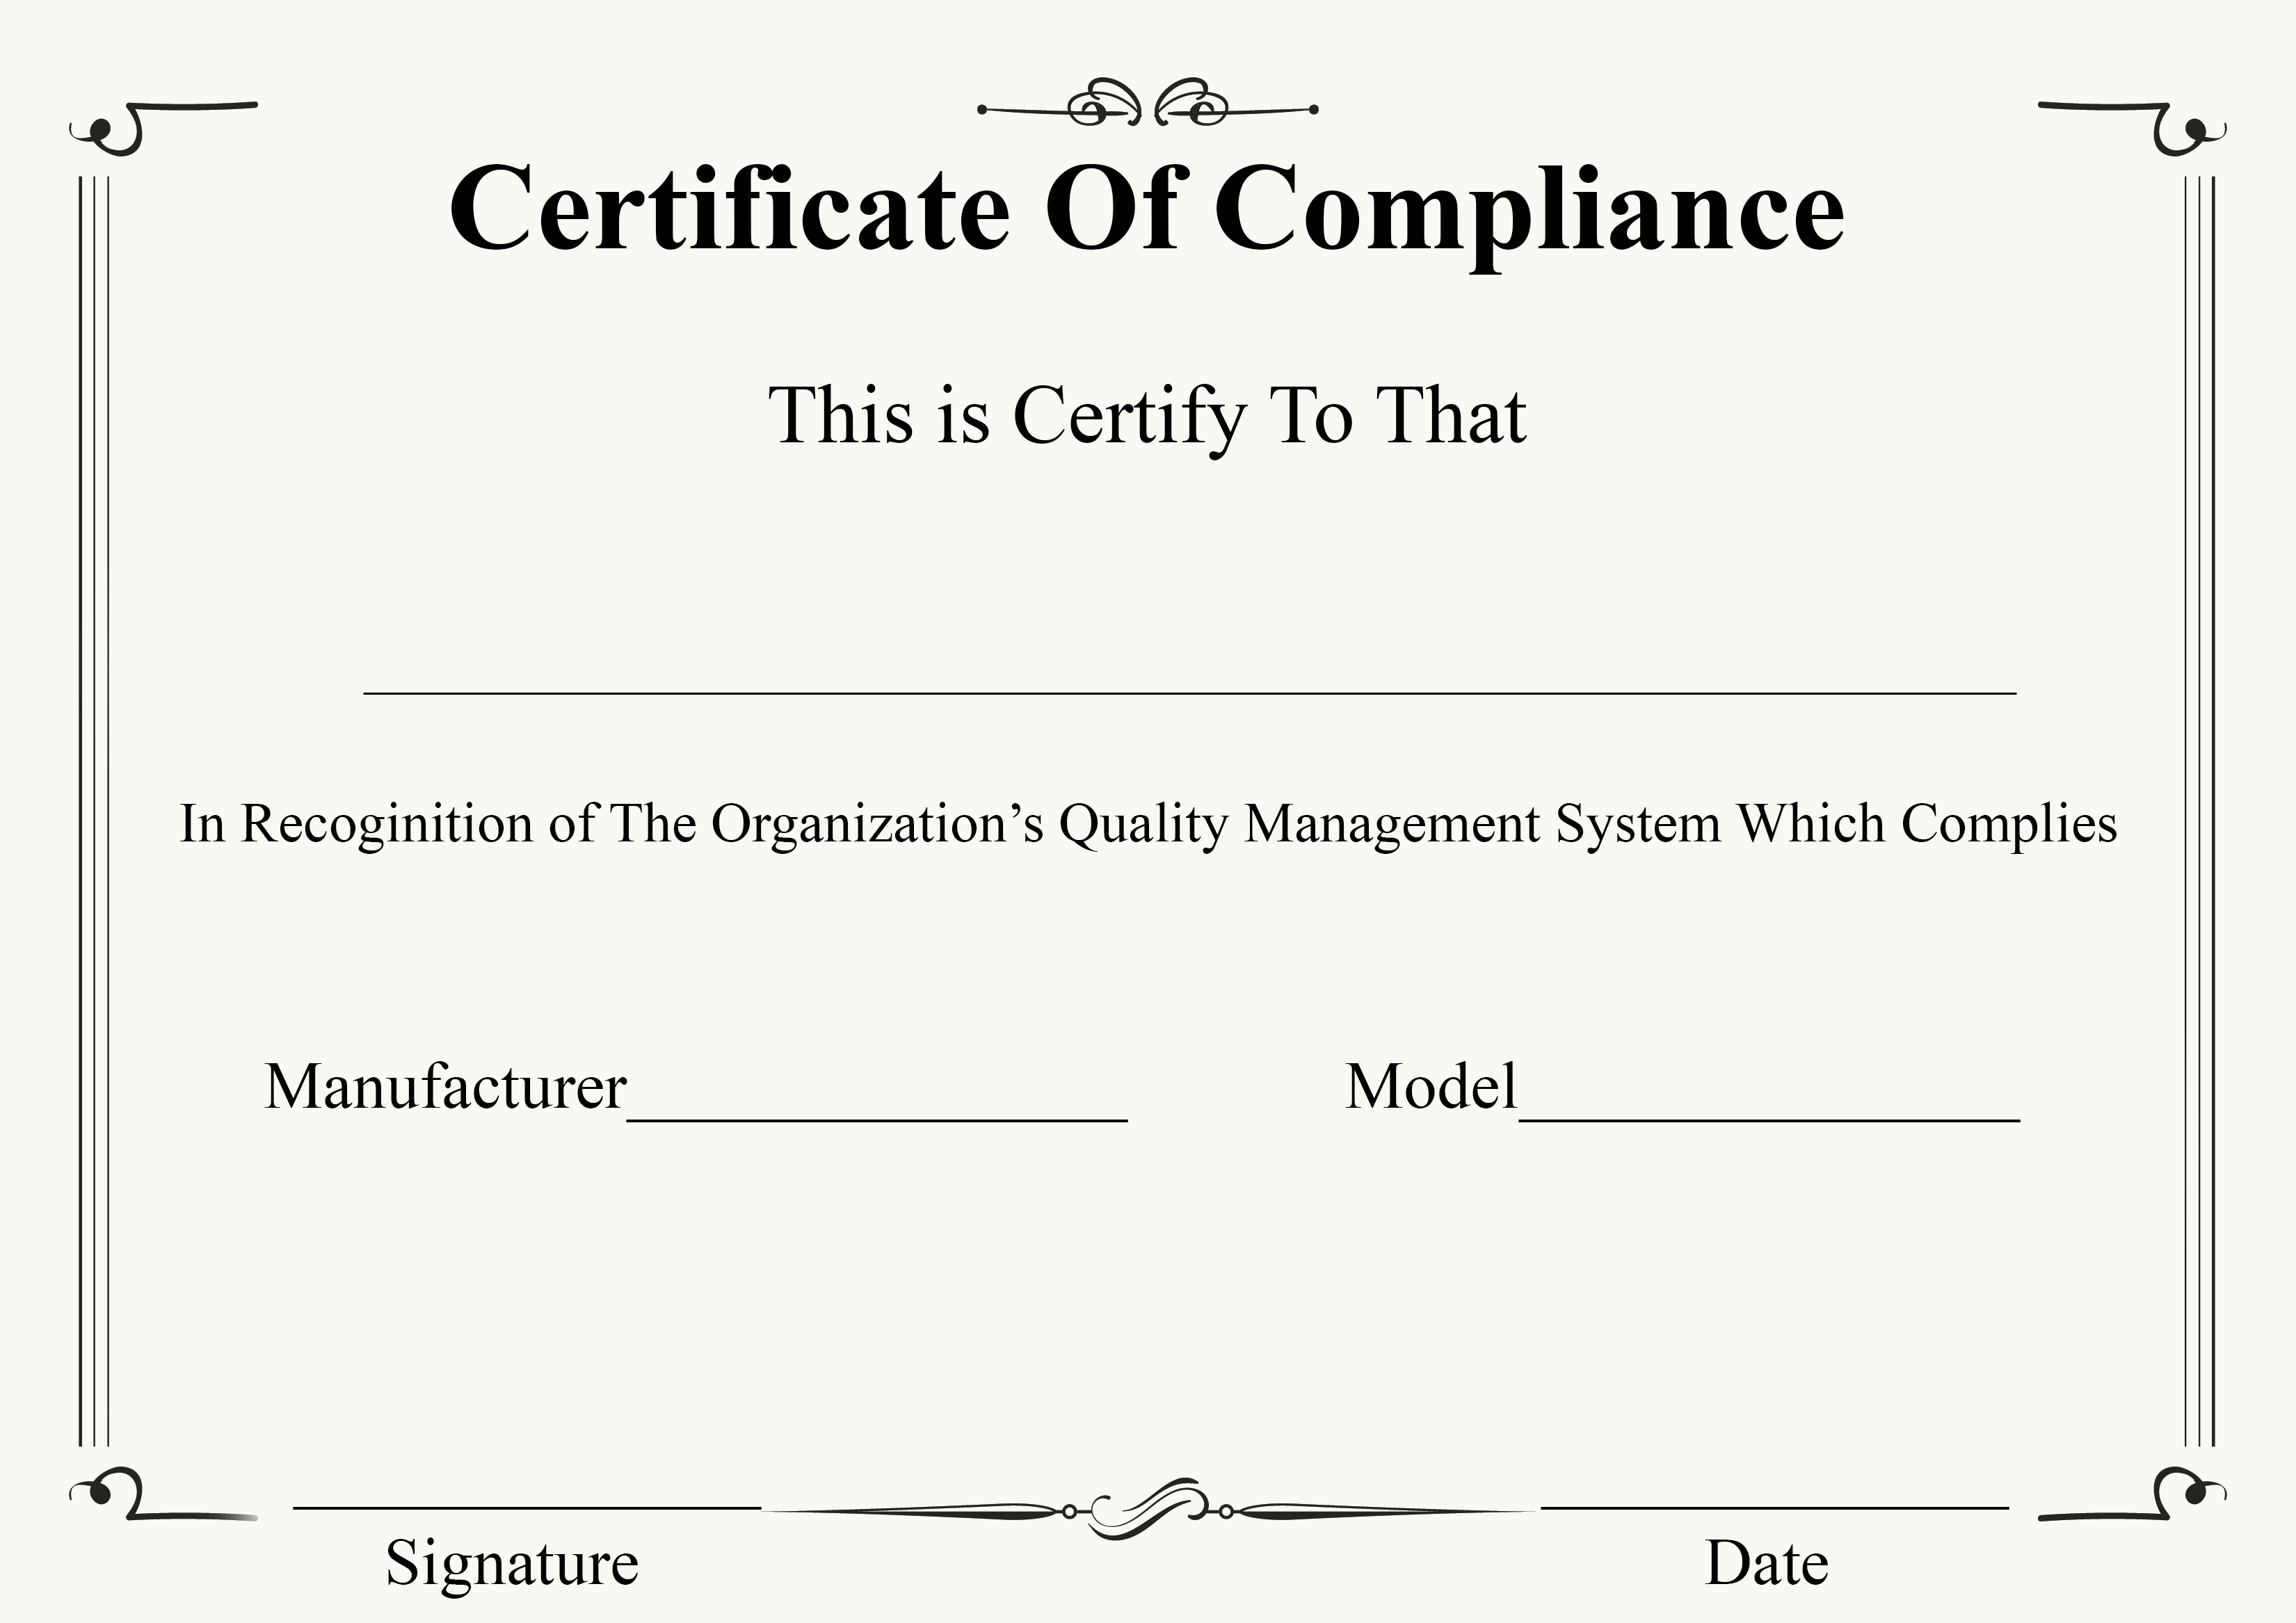 ❤️ Free Certificate Of Compliance Templates❤️ With Regard To Certificate Of Compliance Template